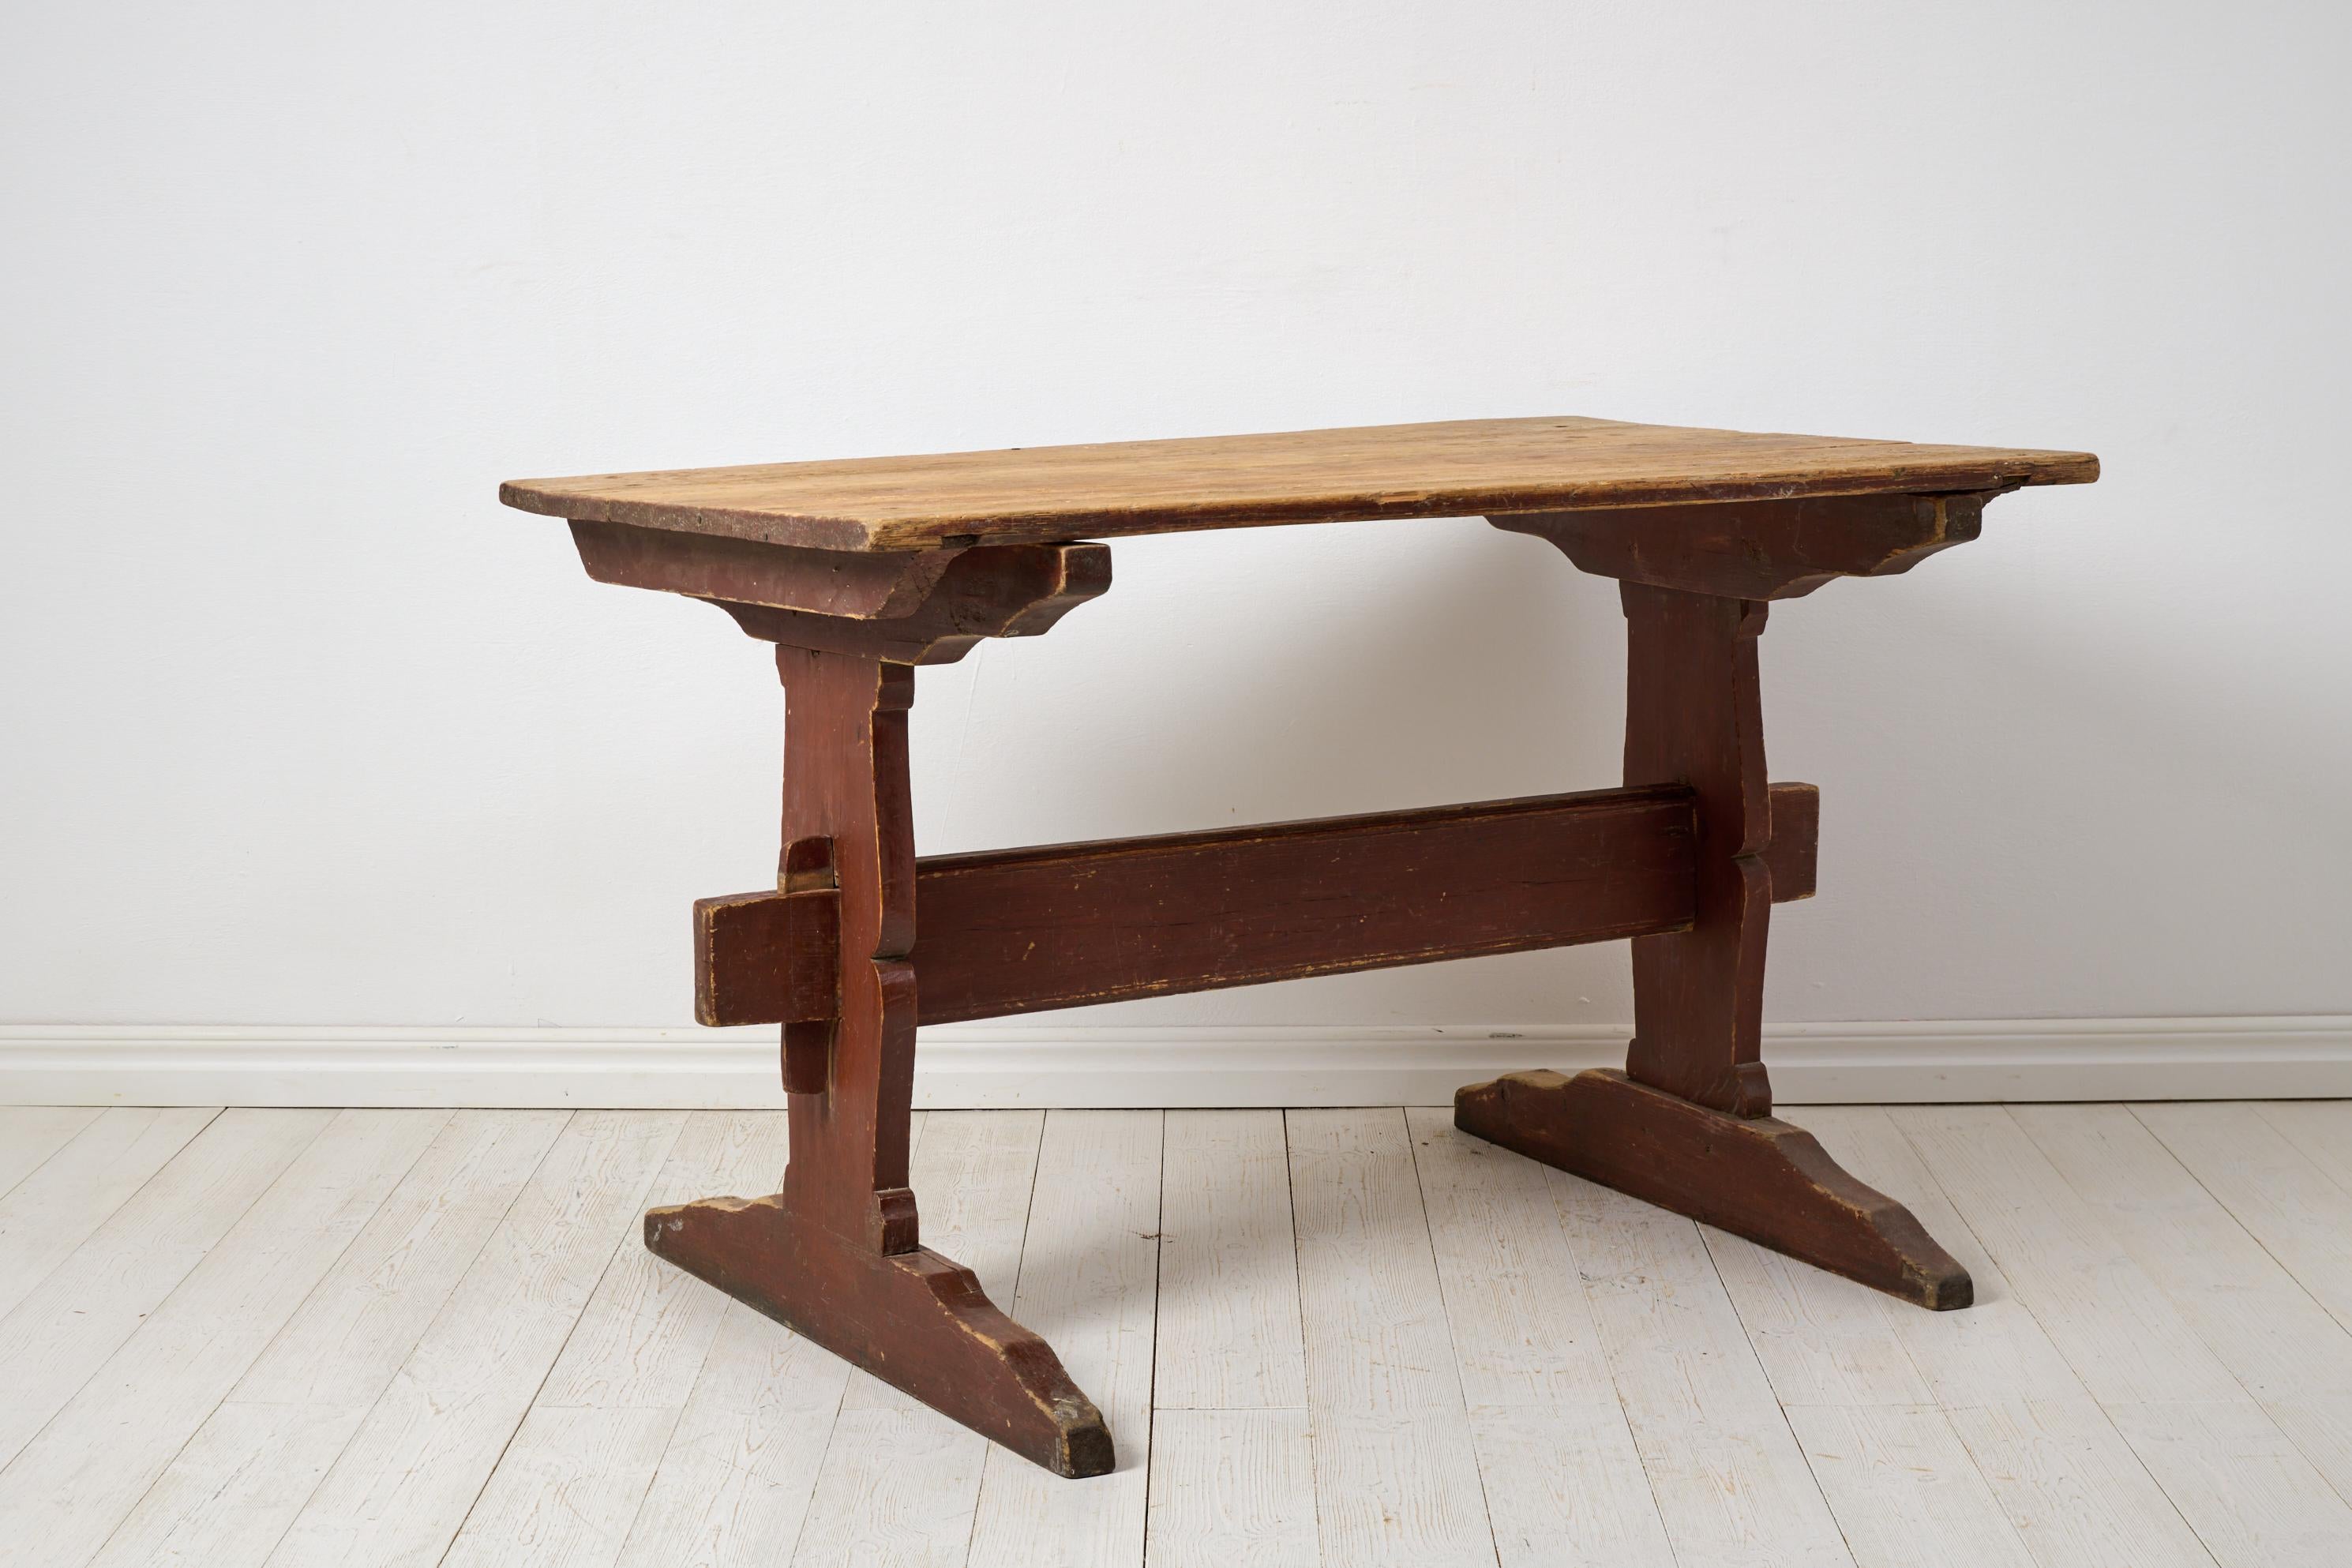 Antique rustic dining table or work table from northern Sweden, made around 1820. The table has a frame in solid pine that’s made by hand, completely without screws or nails. It is in original untouched condition with the original red-painted leg